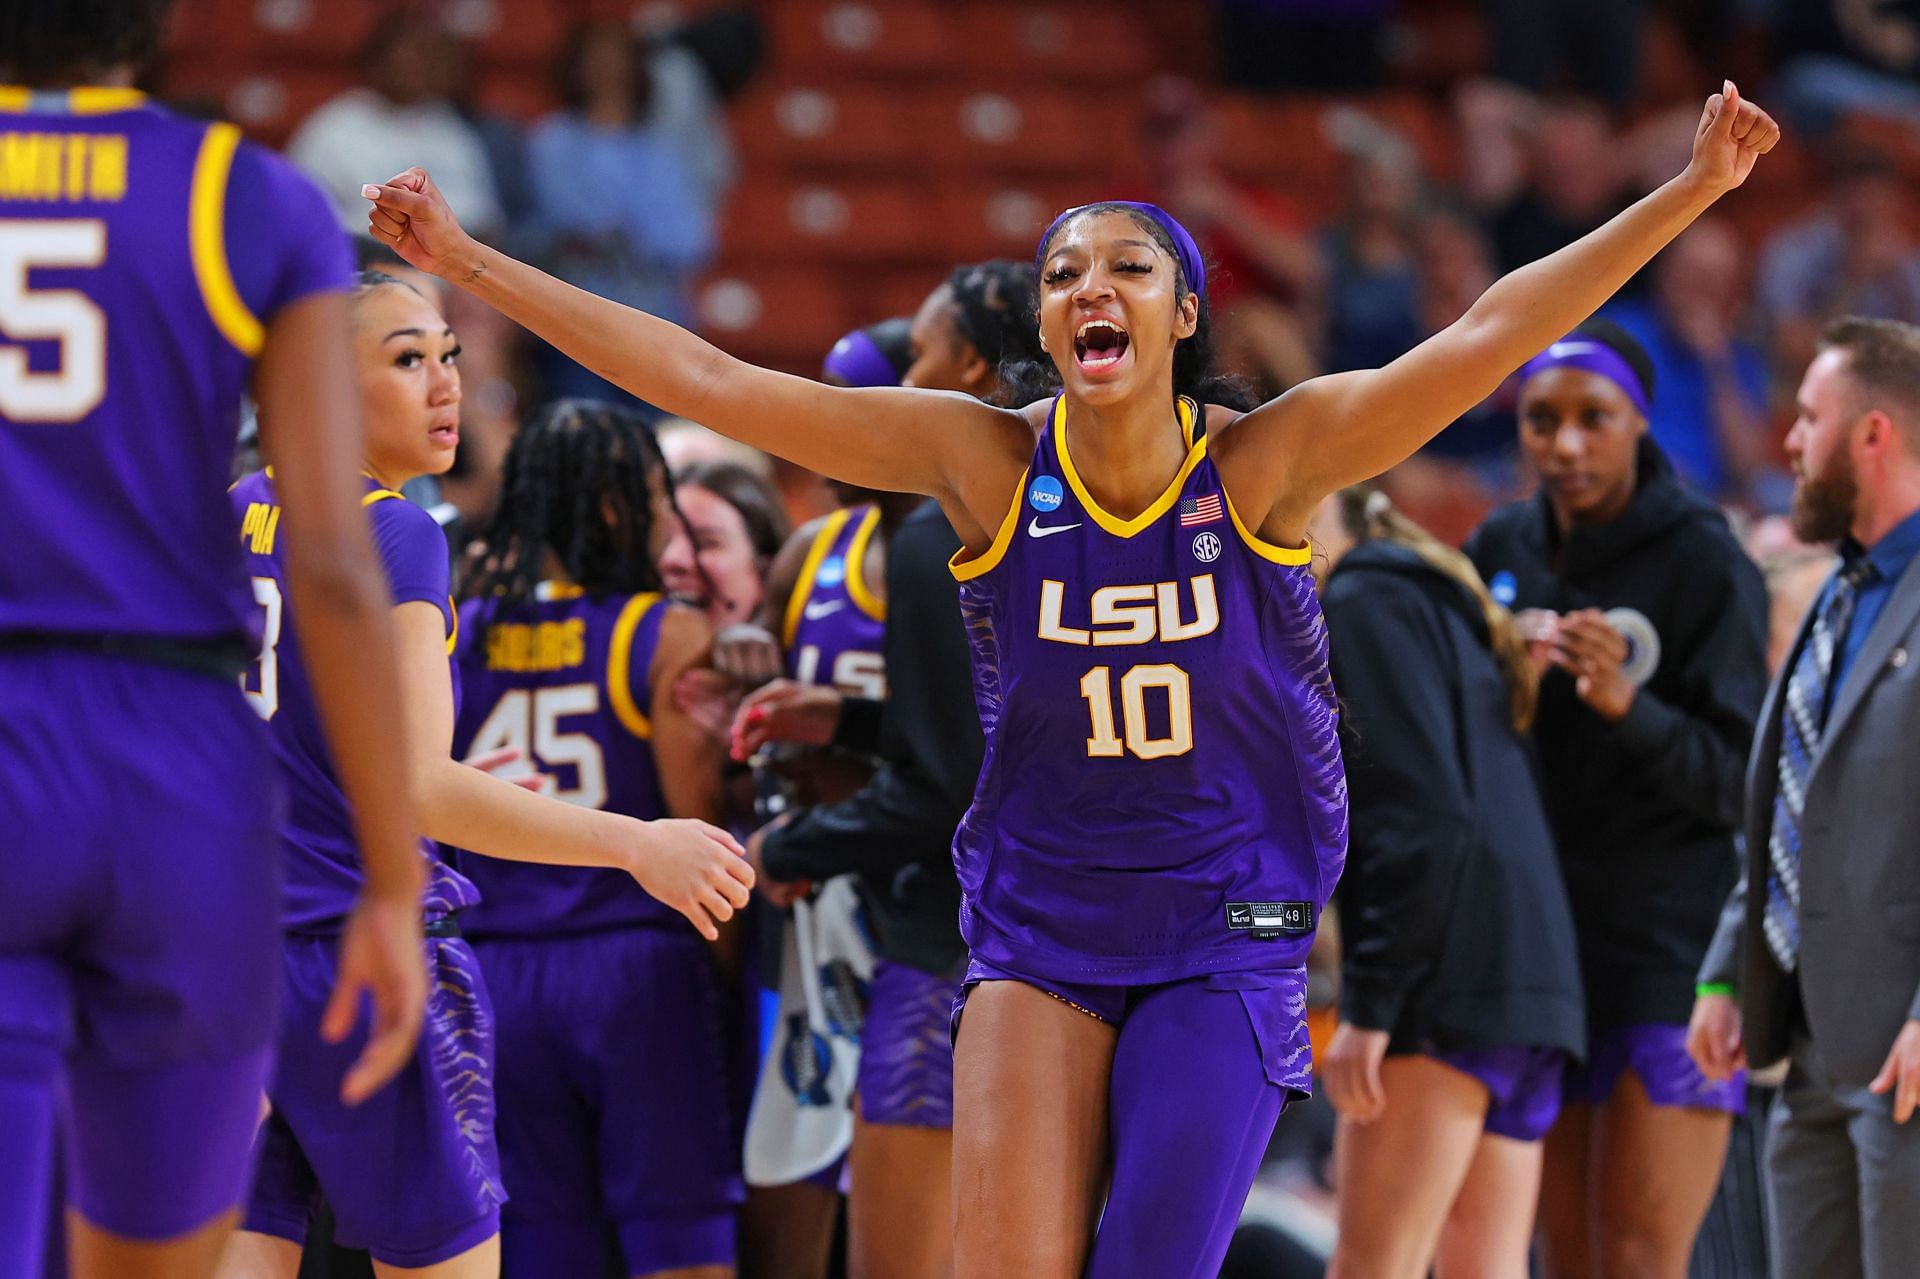 Angel Reese of the LSU Tigers celebrates after LSU beat the Utah Utes.